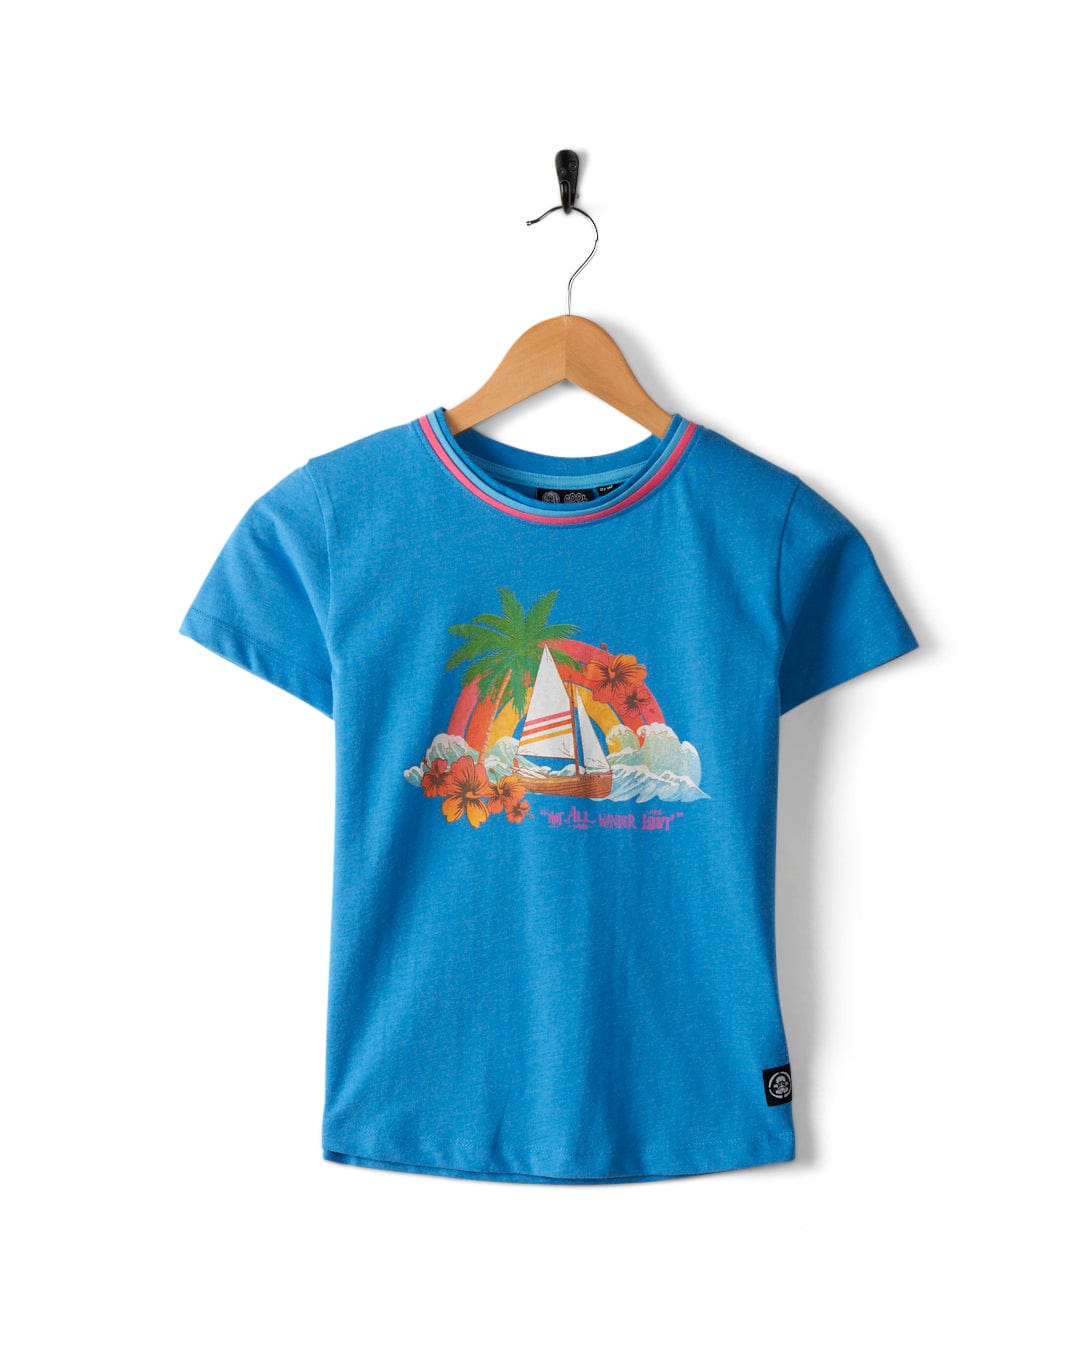 Floral Lost Ships - Kids Recycled T-Shirt - Blue, featuring a tropical sailboat graphic, palm trees, flowers, and the text "Sail Away," designed by Saltrock using recycled materials, hanging on a wooden hanger against a white background.